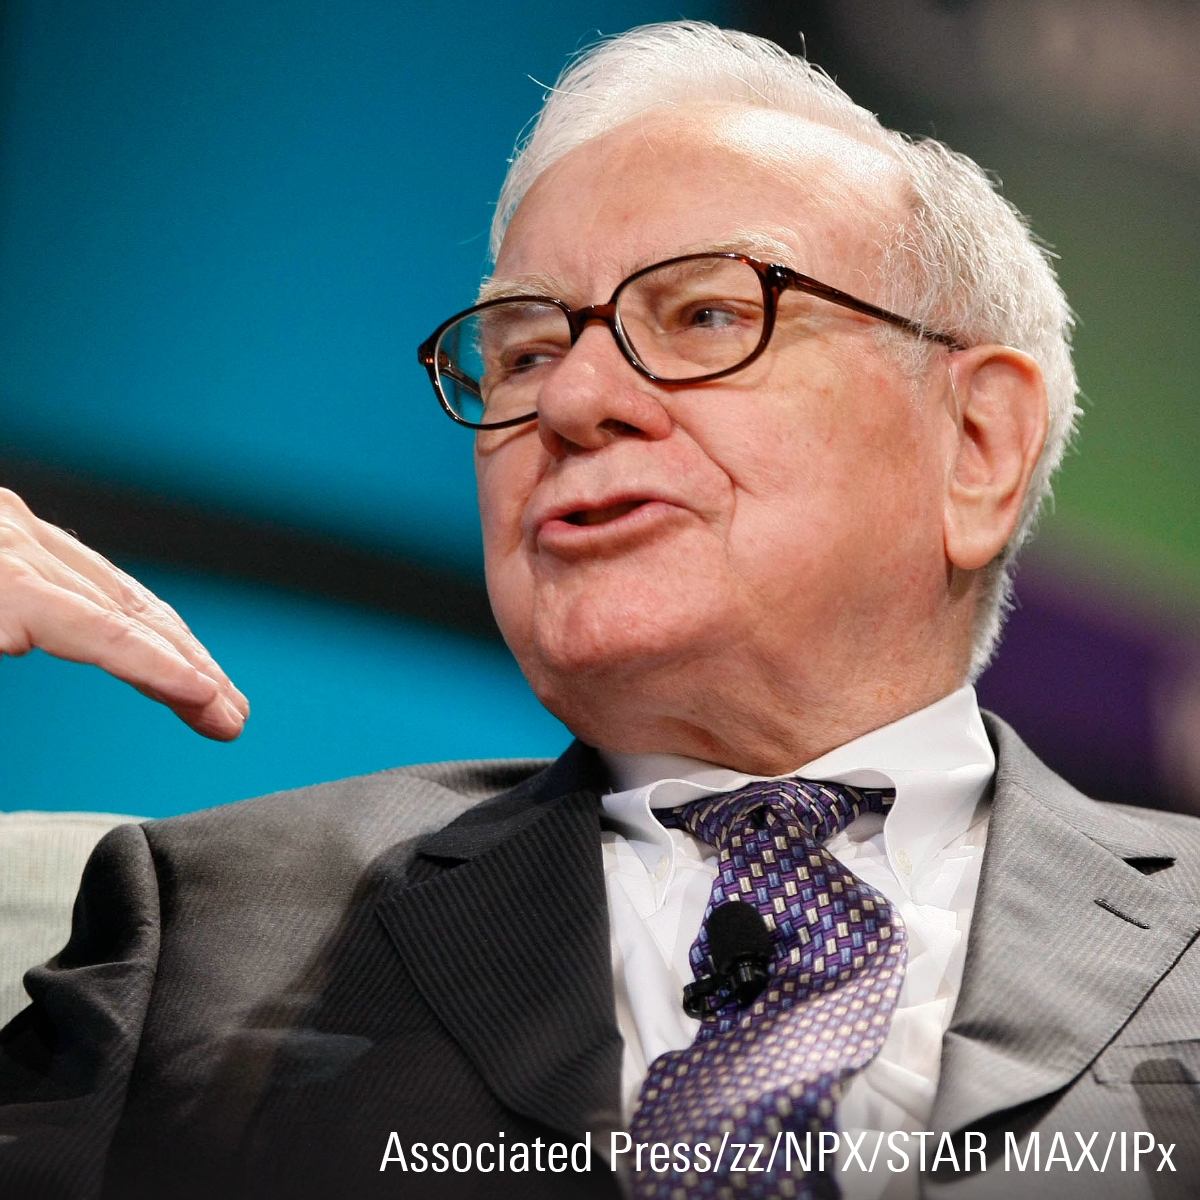 3 Stocks to Buy After Berkshire Hathaway’s Just-Released 13F Filing